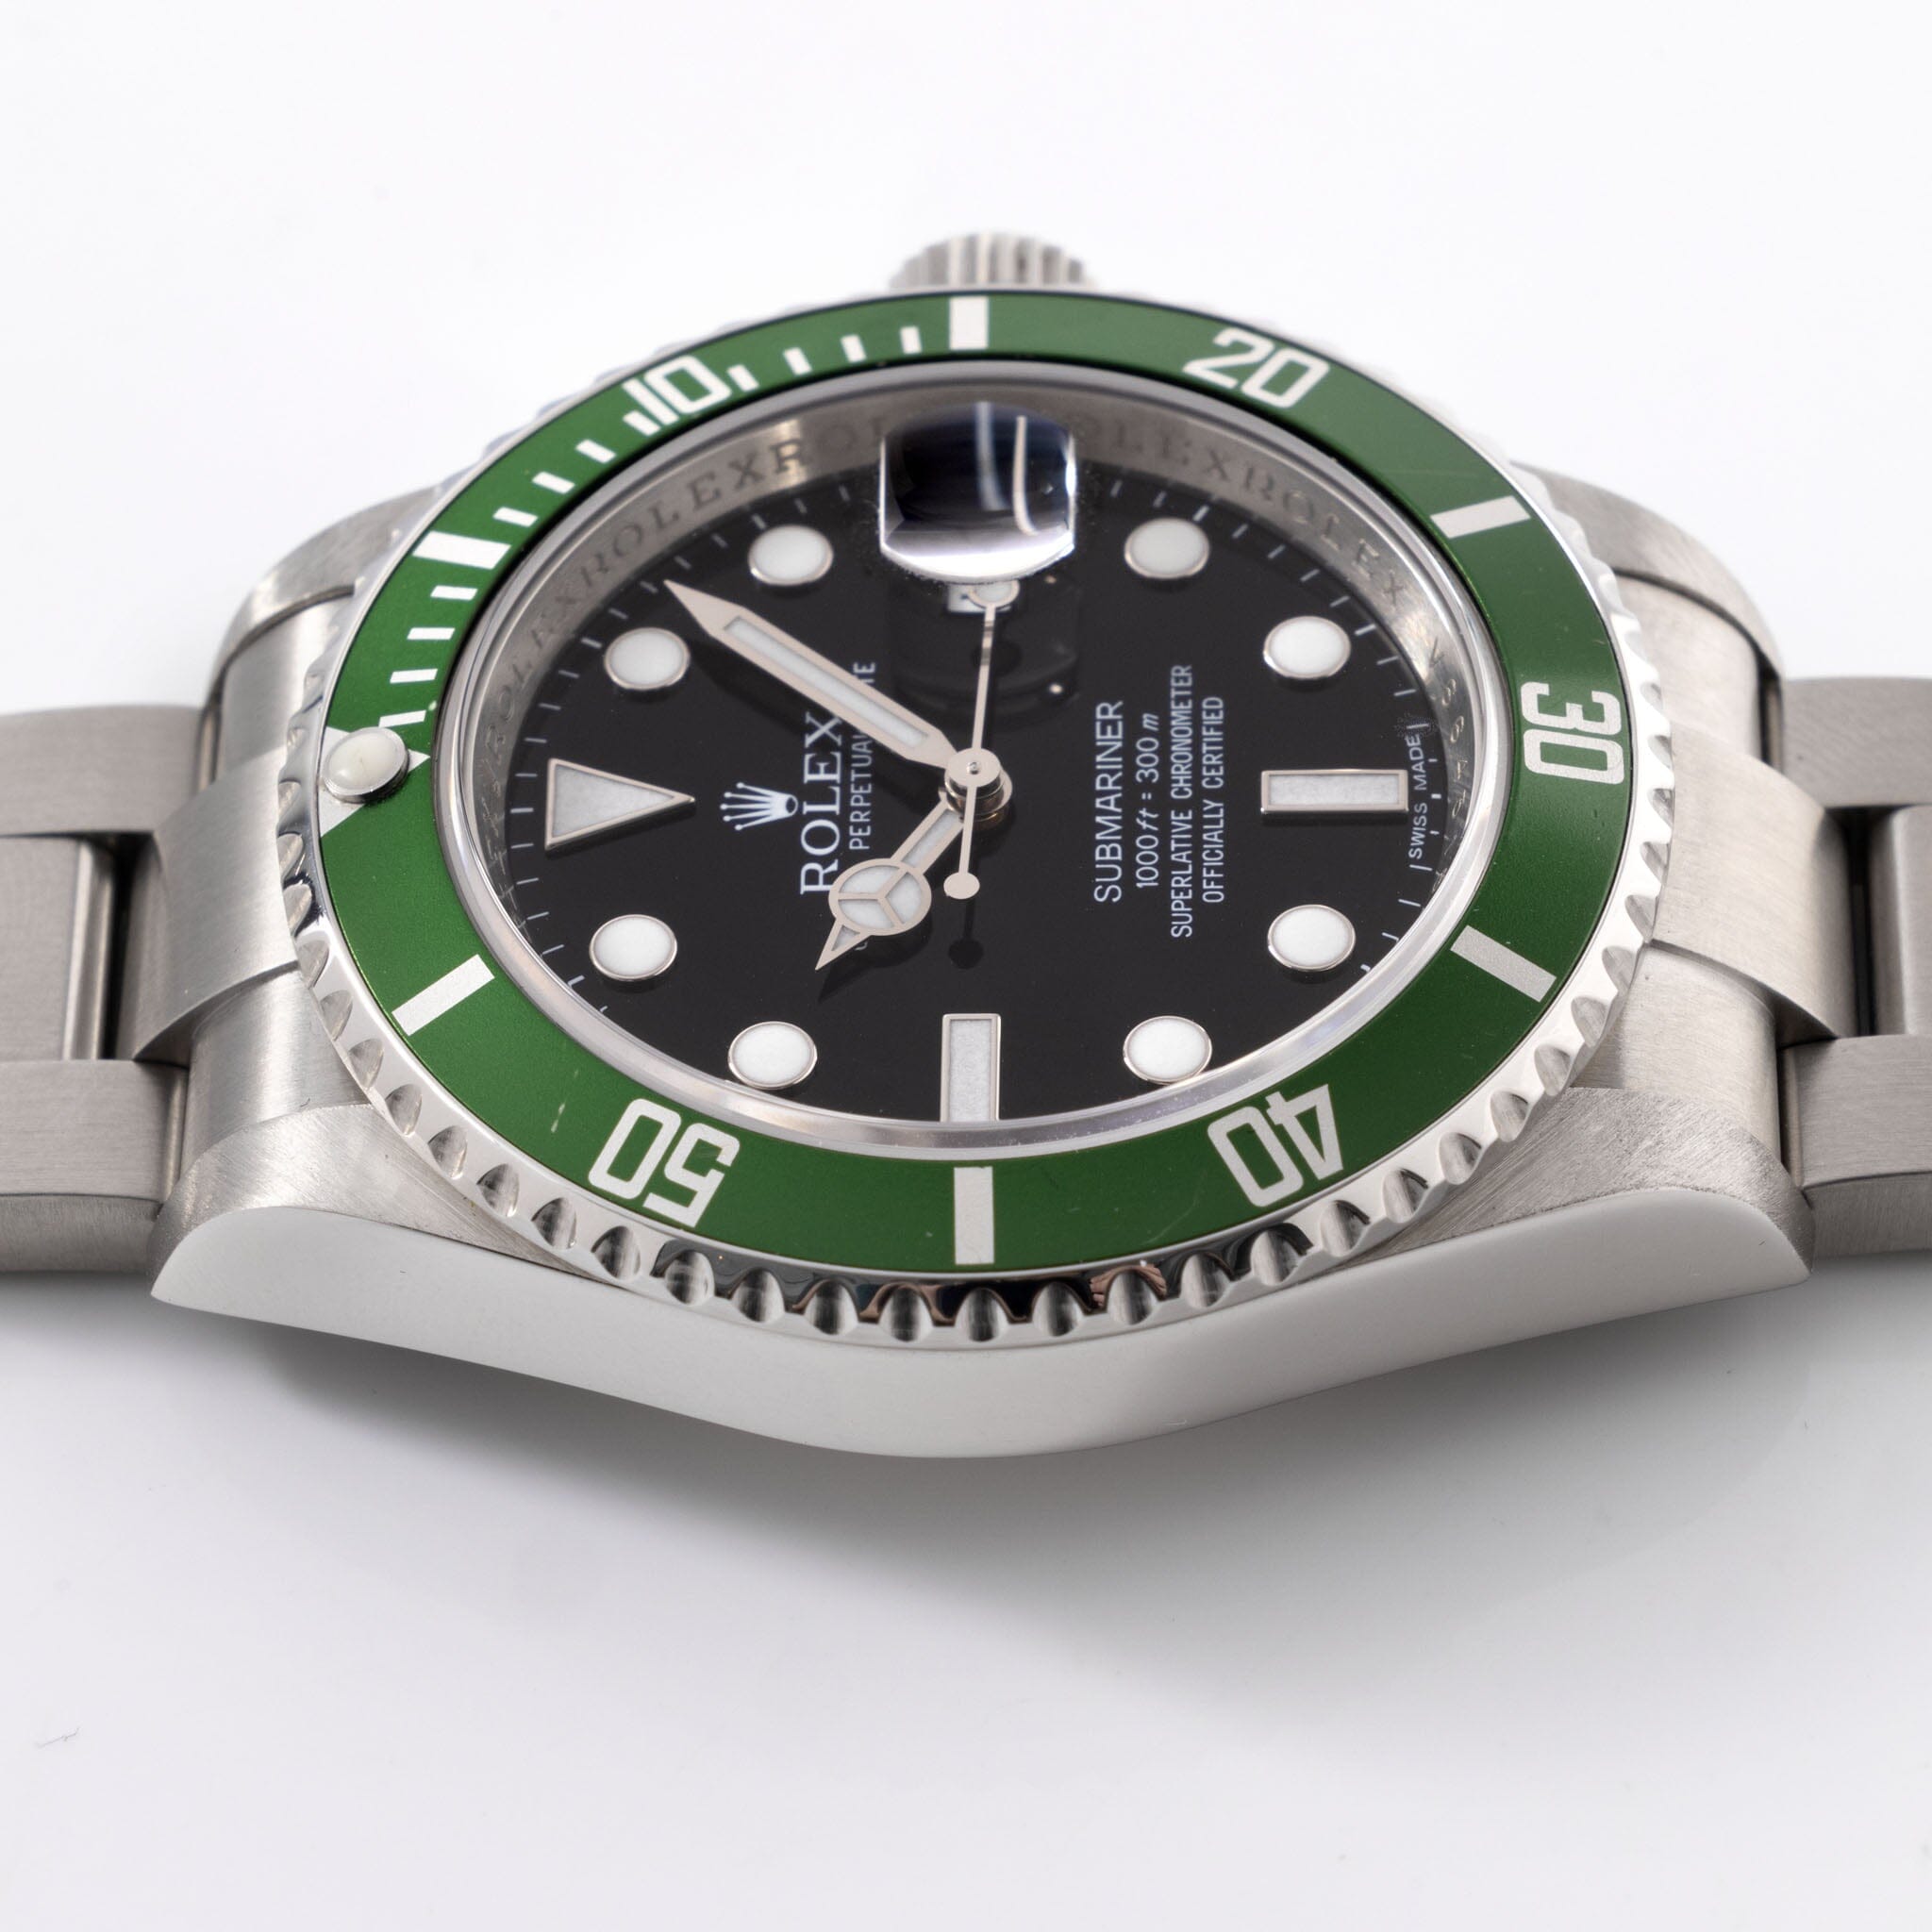 Rolex Submariner Date Green Bezel Box and Papers Ref 16610LV 